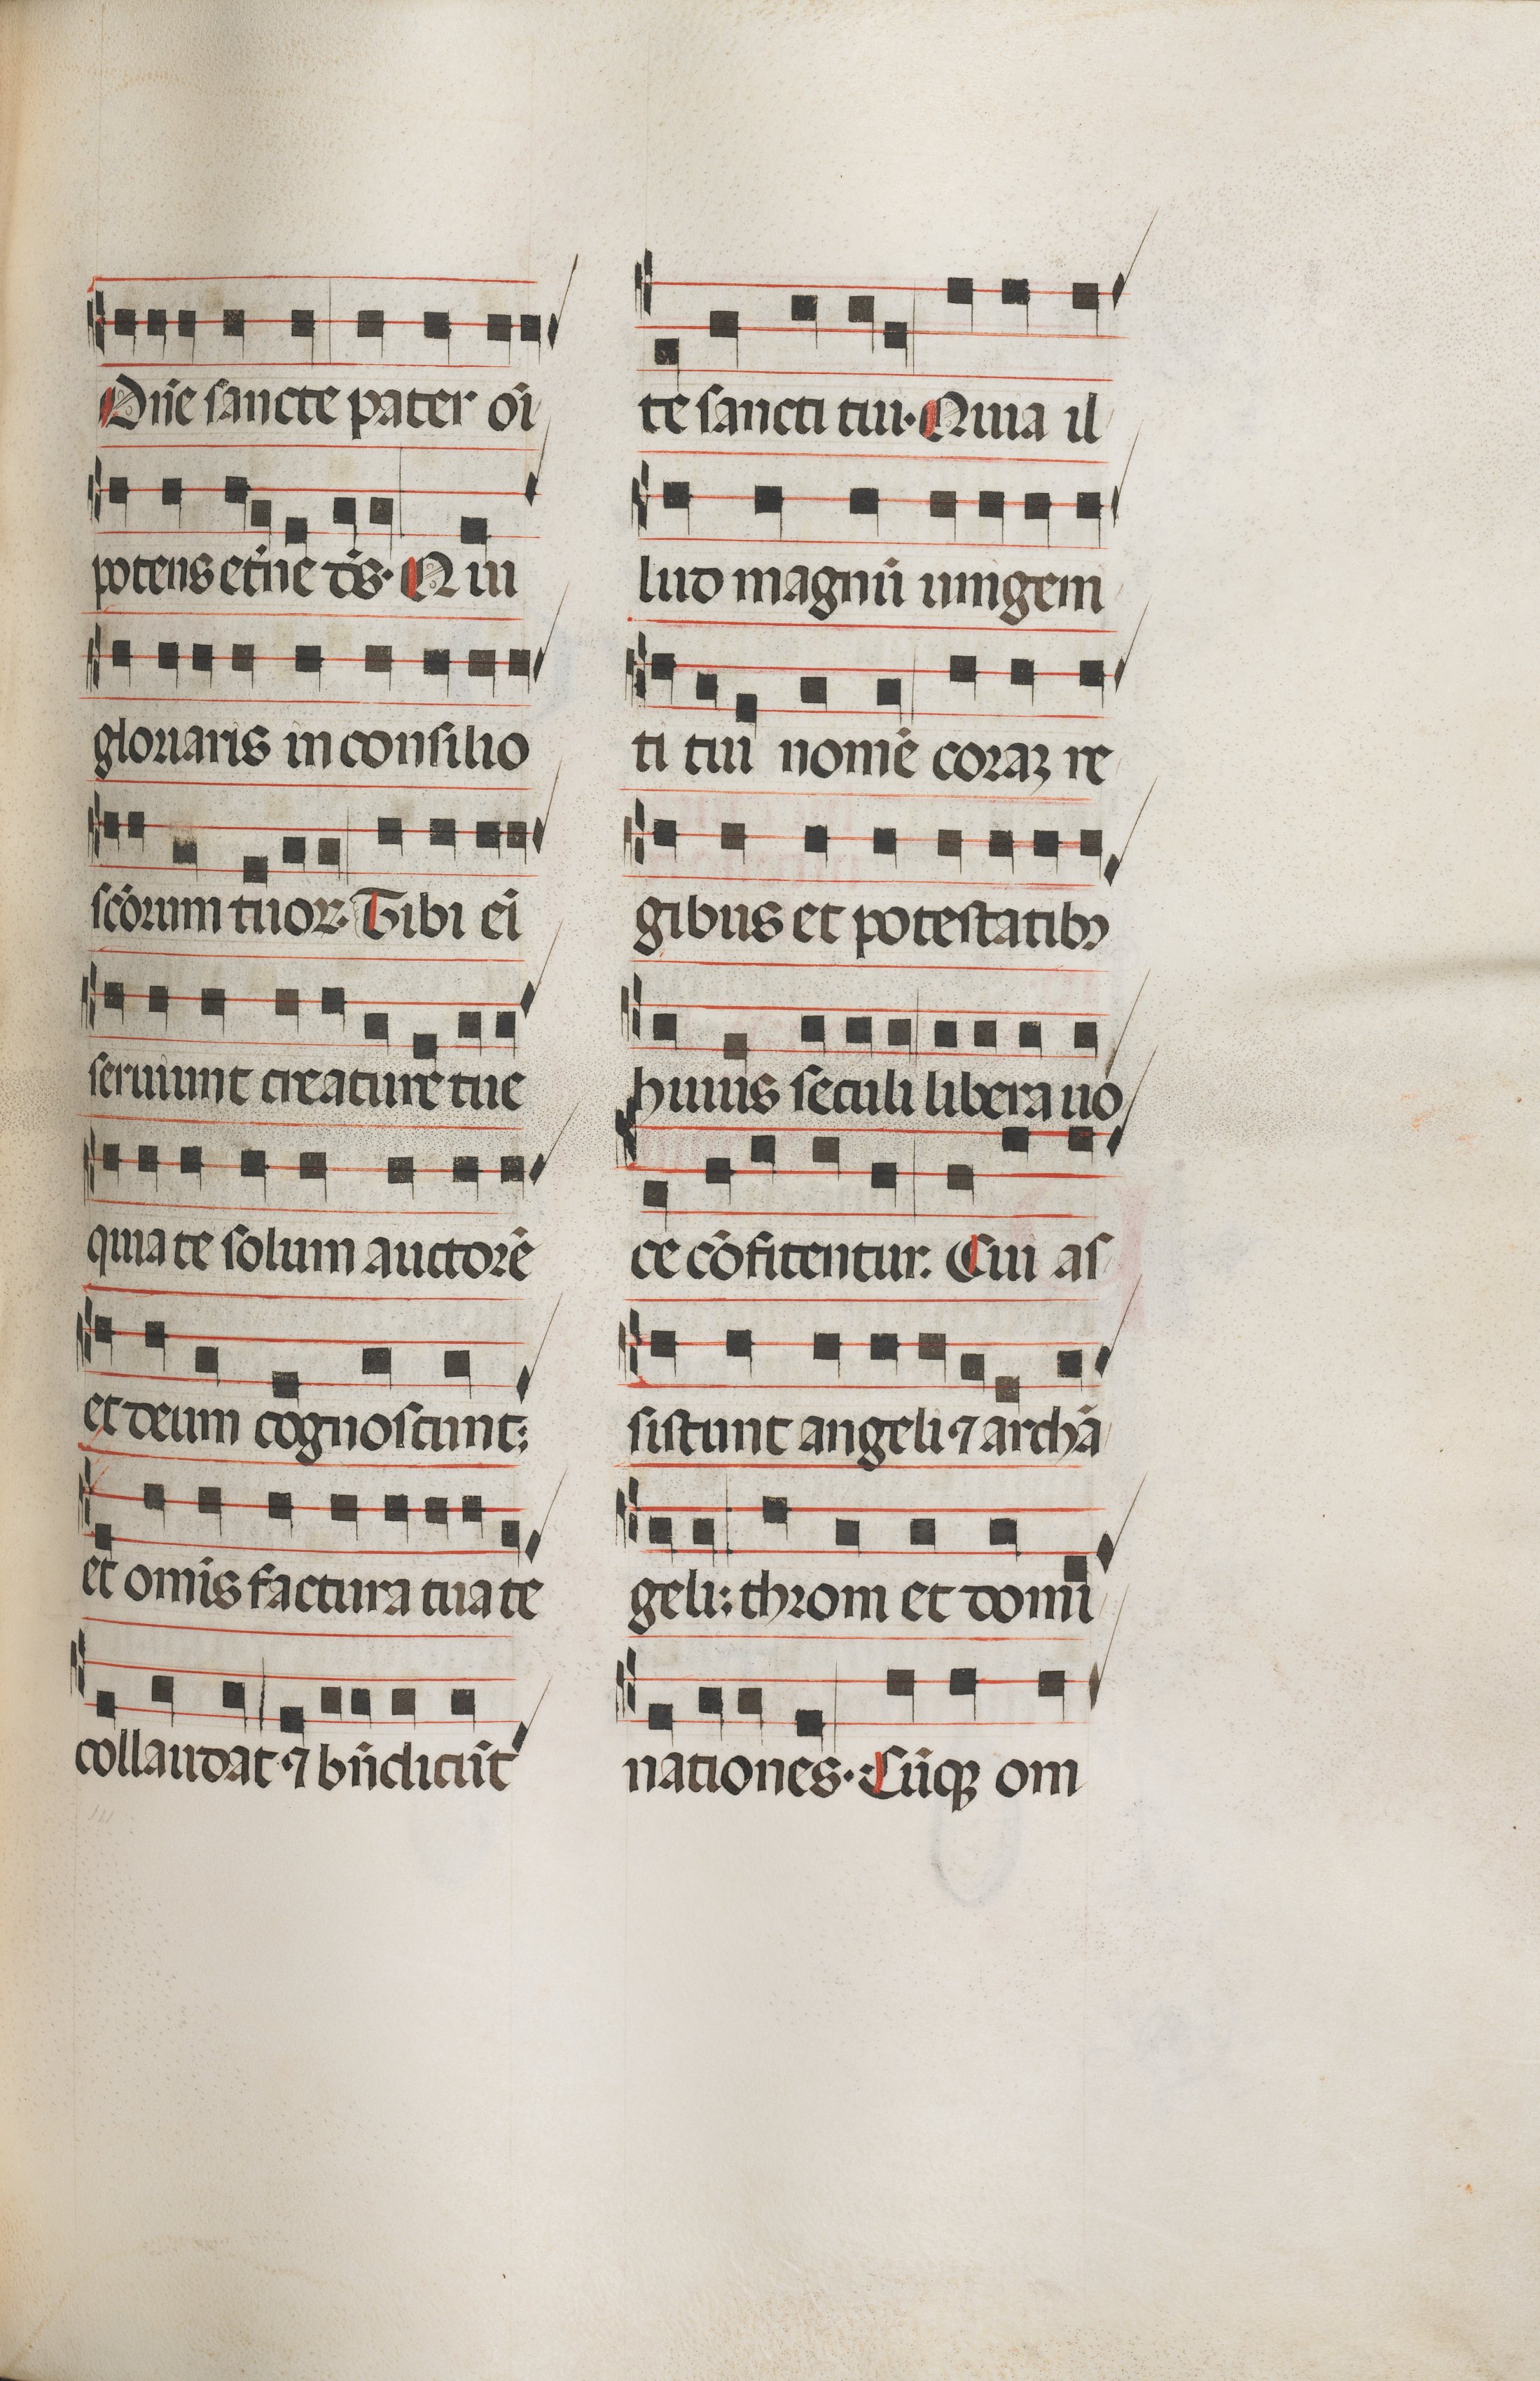 Missale: Fol. 112: contains some music as part of Palm Sunday liturgy